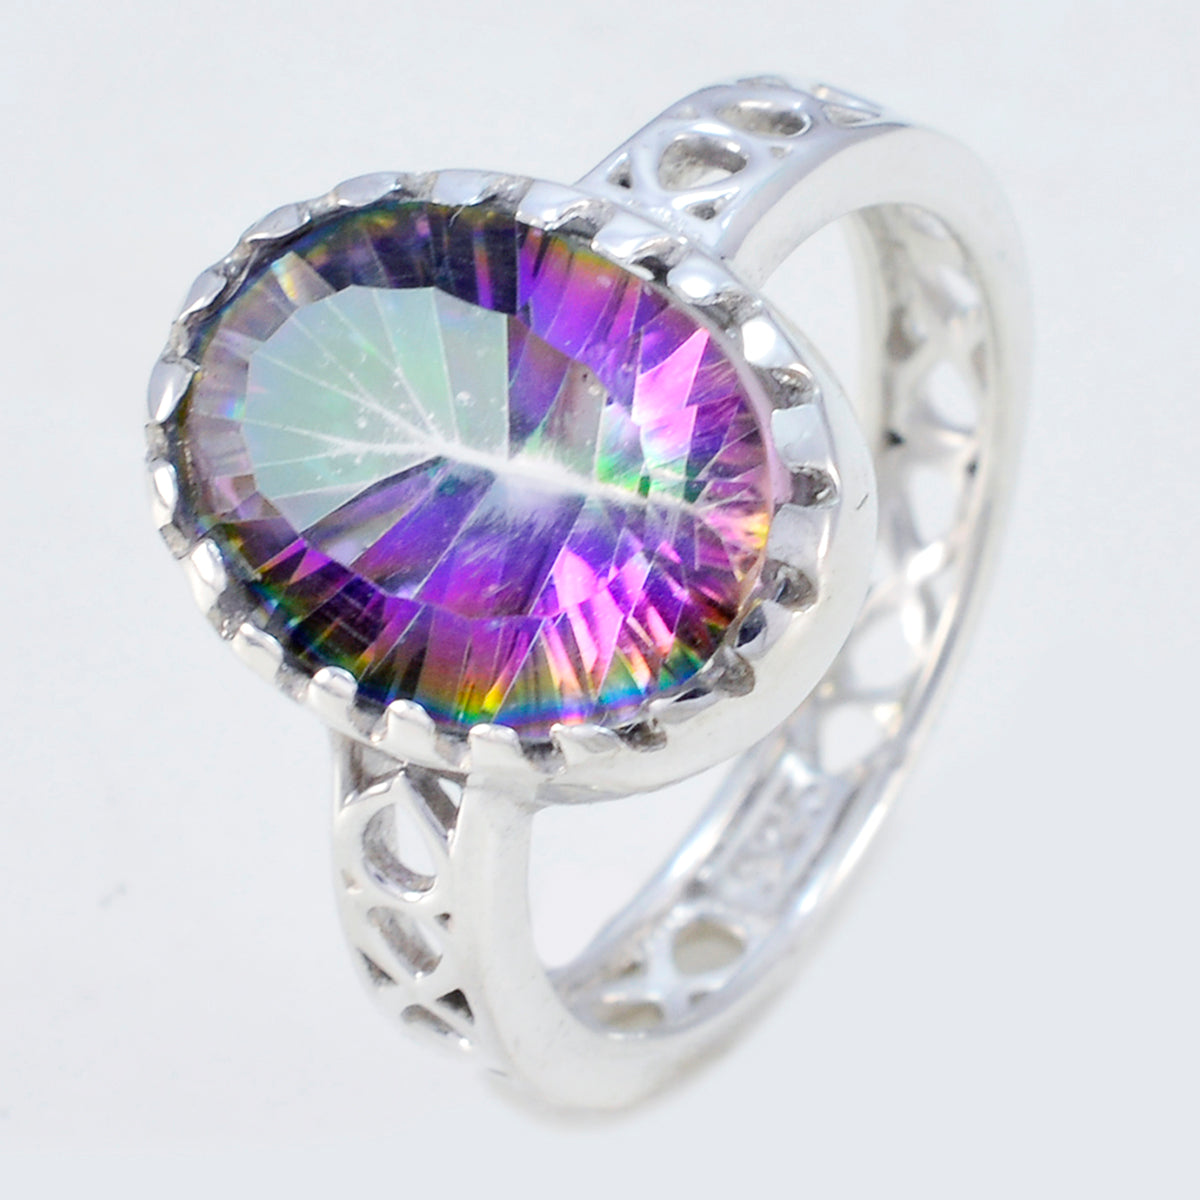 Wholesale Gem Mystic Quartz Sterling Silver Ring Closest Jewelry Store